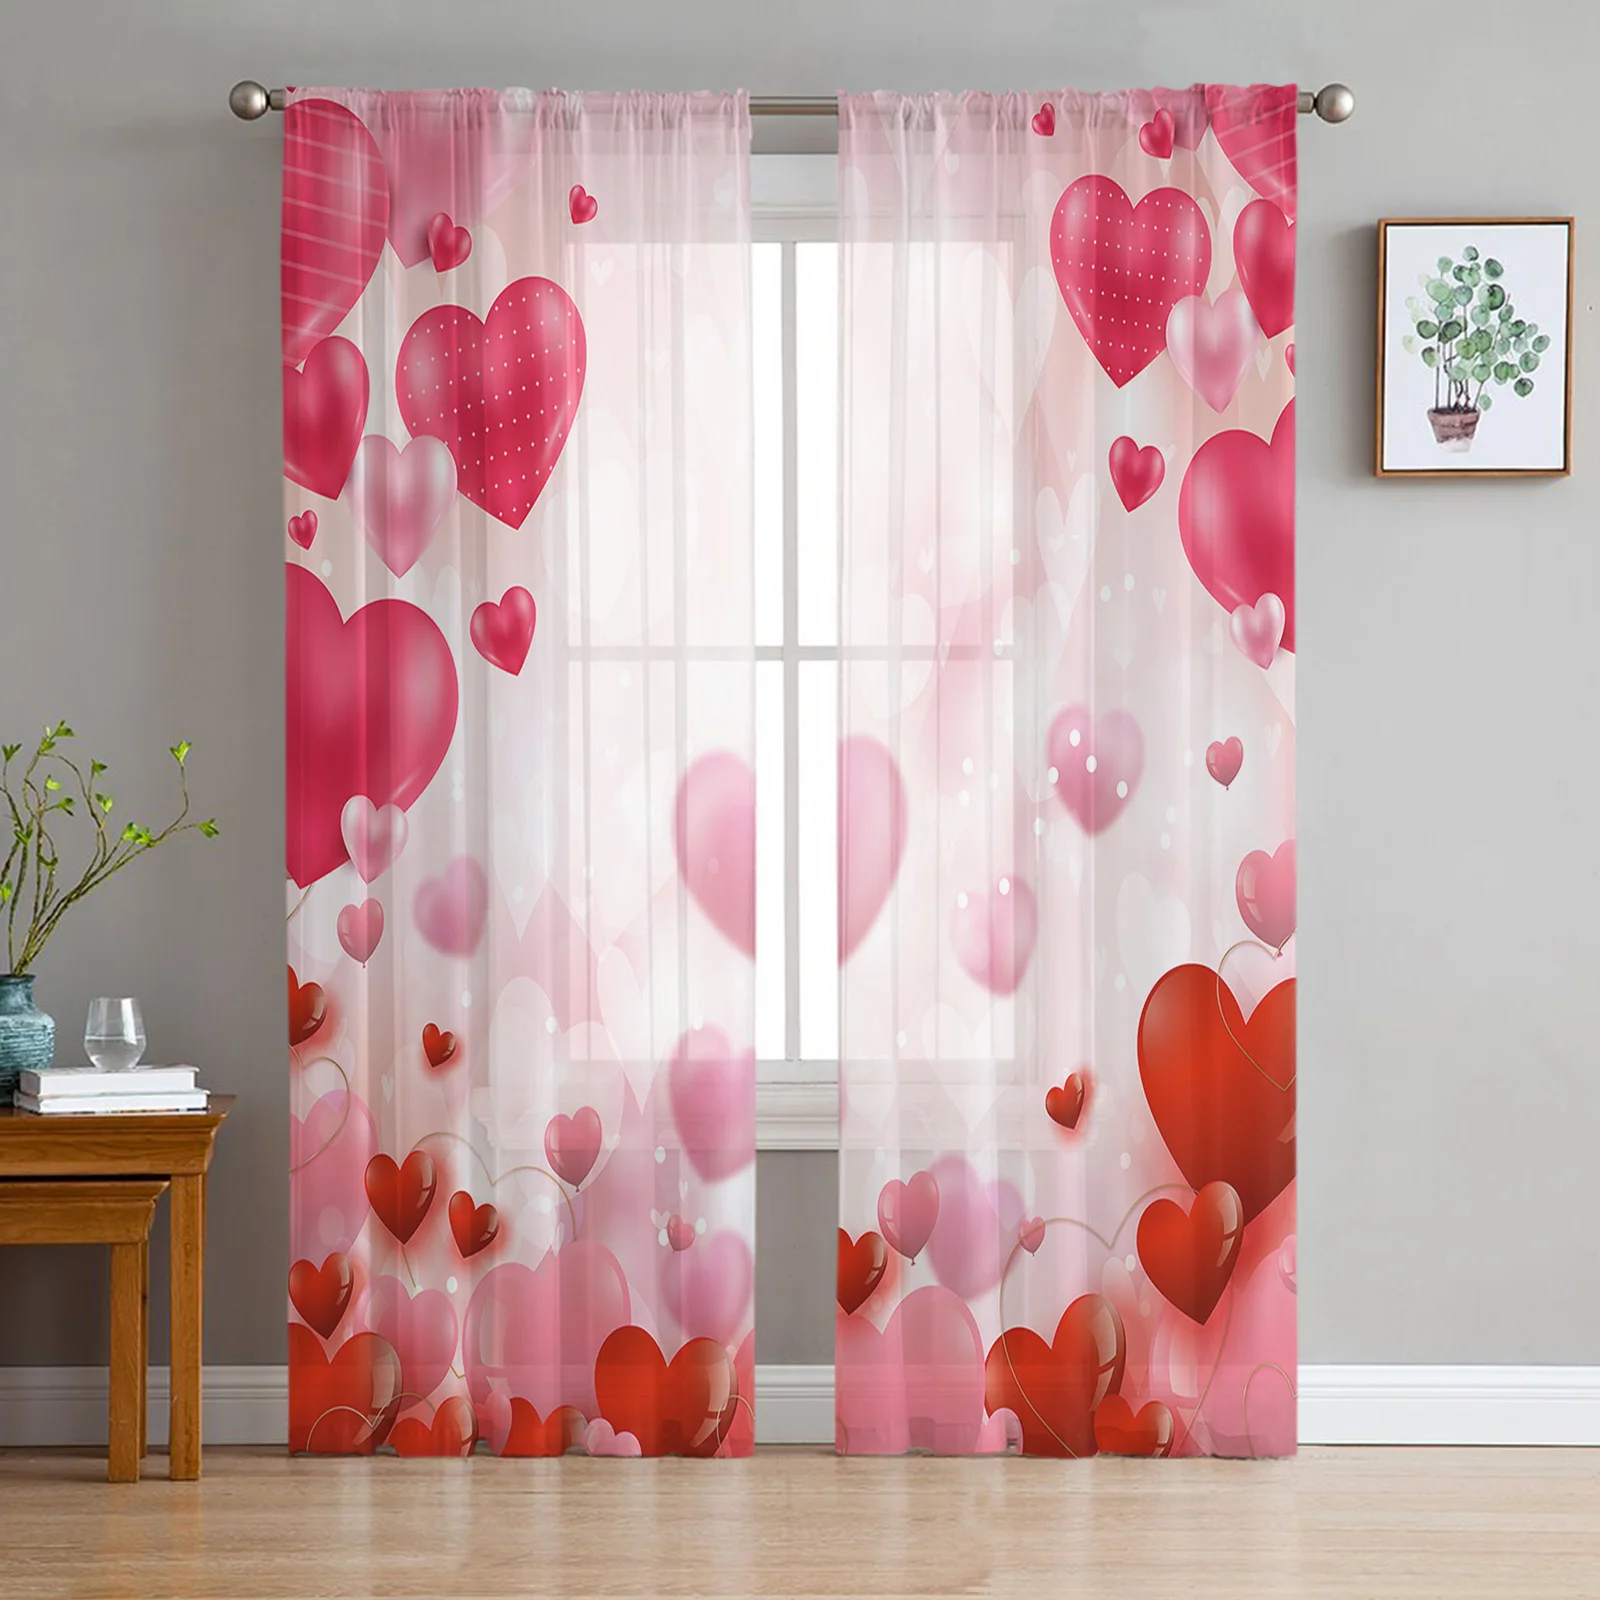 

Valentine'S Day Love Balloon Illustration Sheer Curtains Living Room Bedroom Voile Window Curtain Balcony Kitchen Tulle Drapes